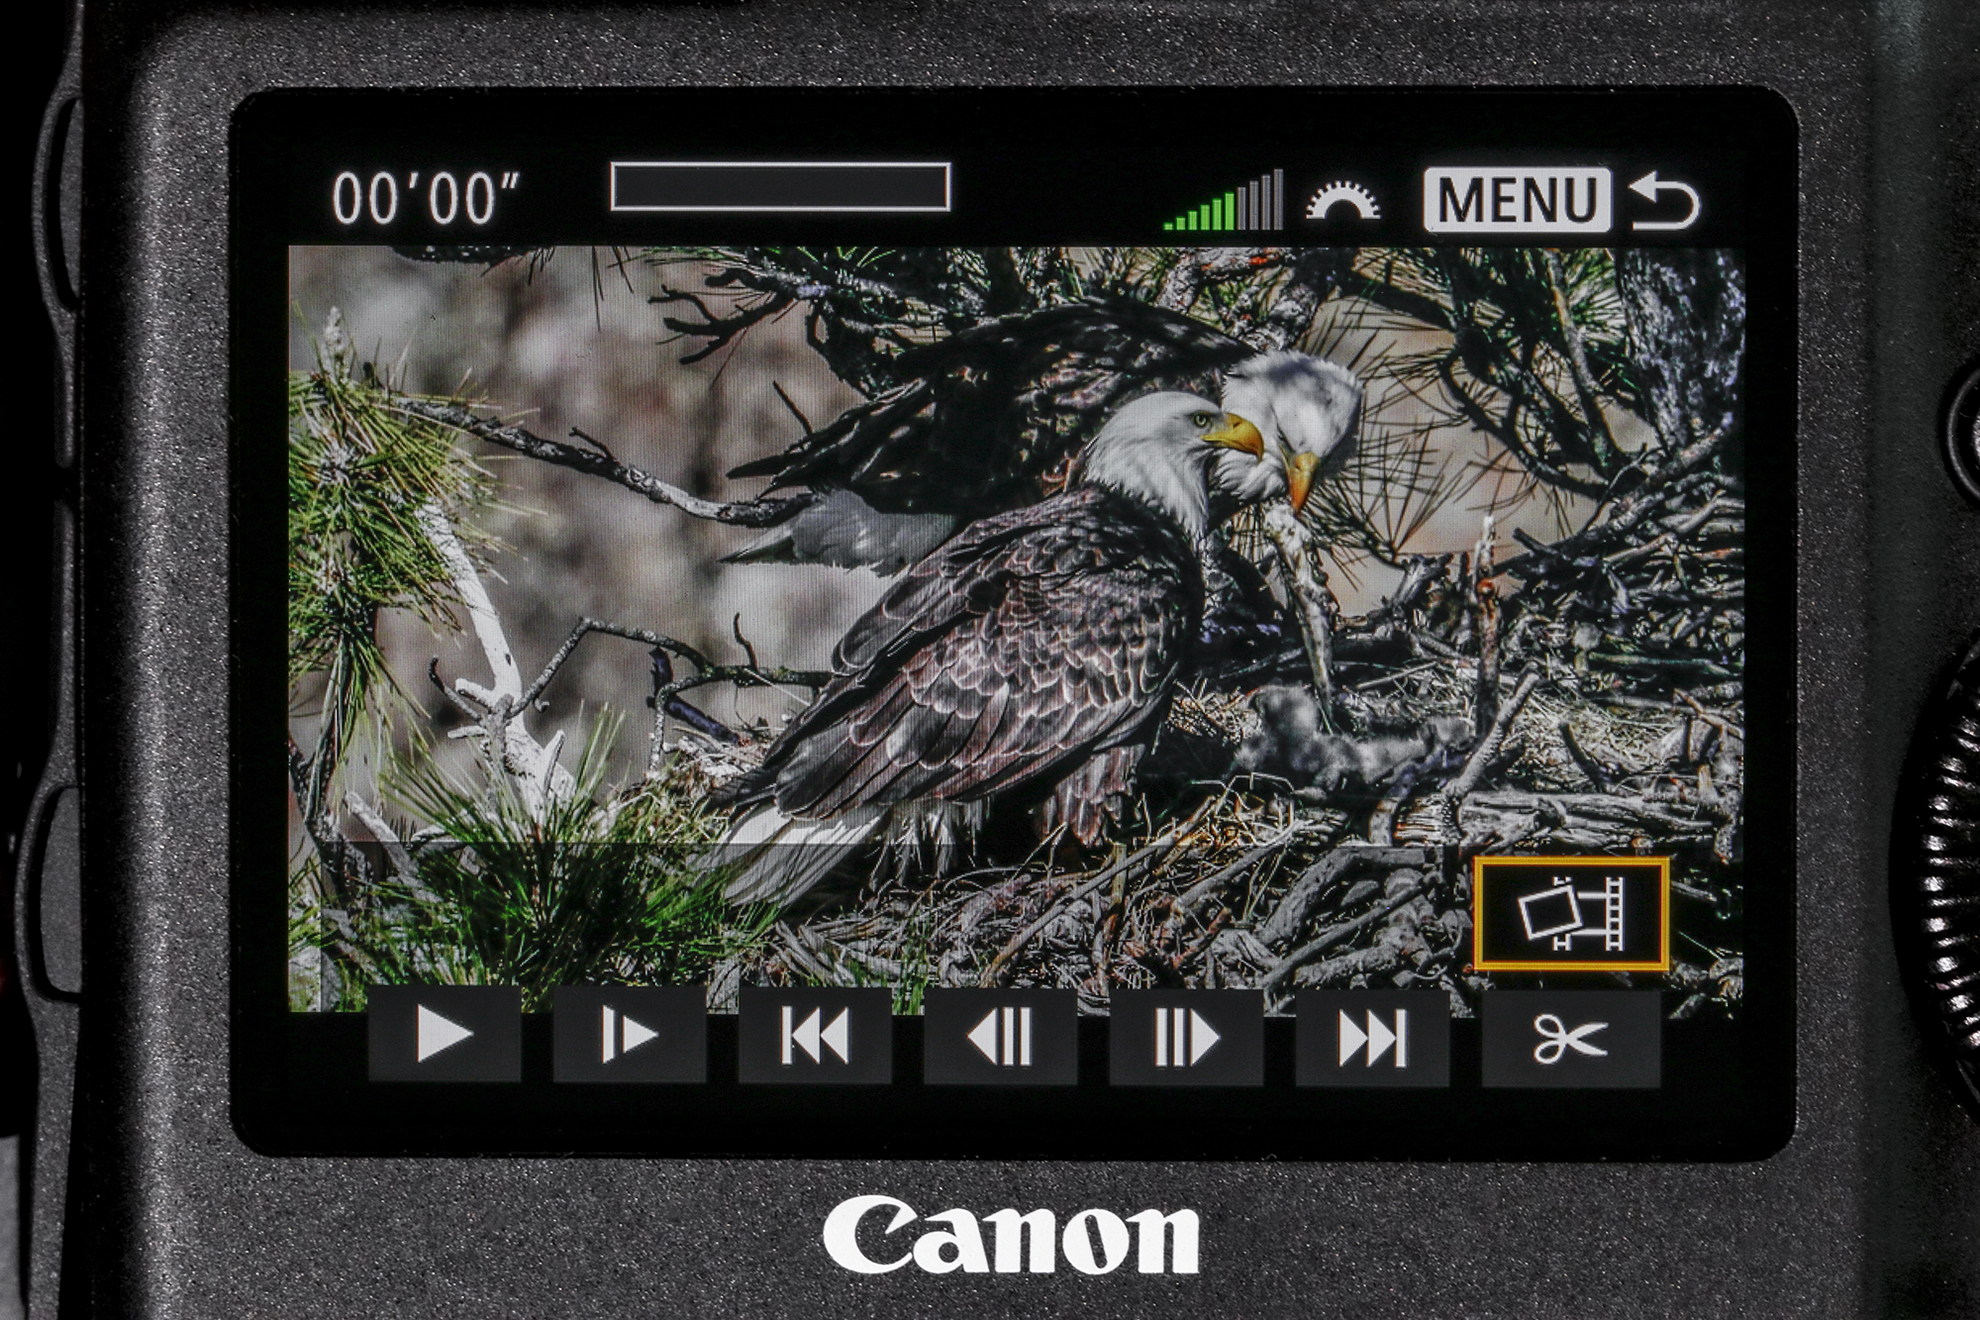 view through camera of two bald eagles in nest